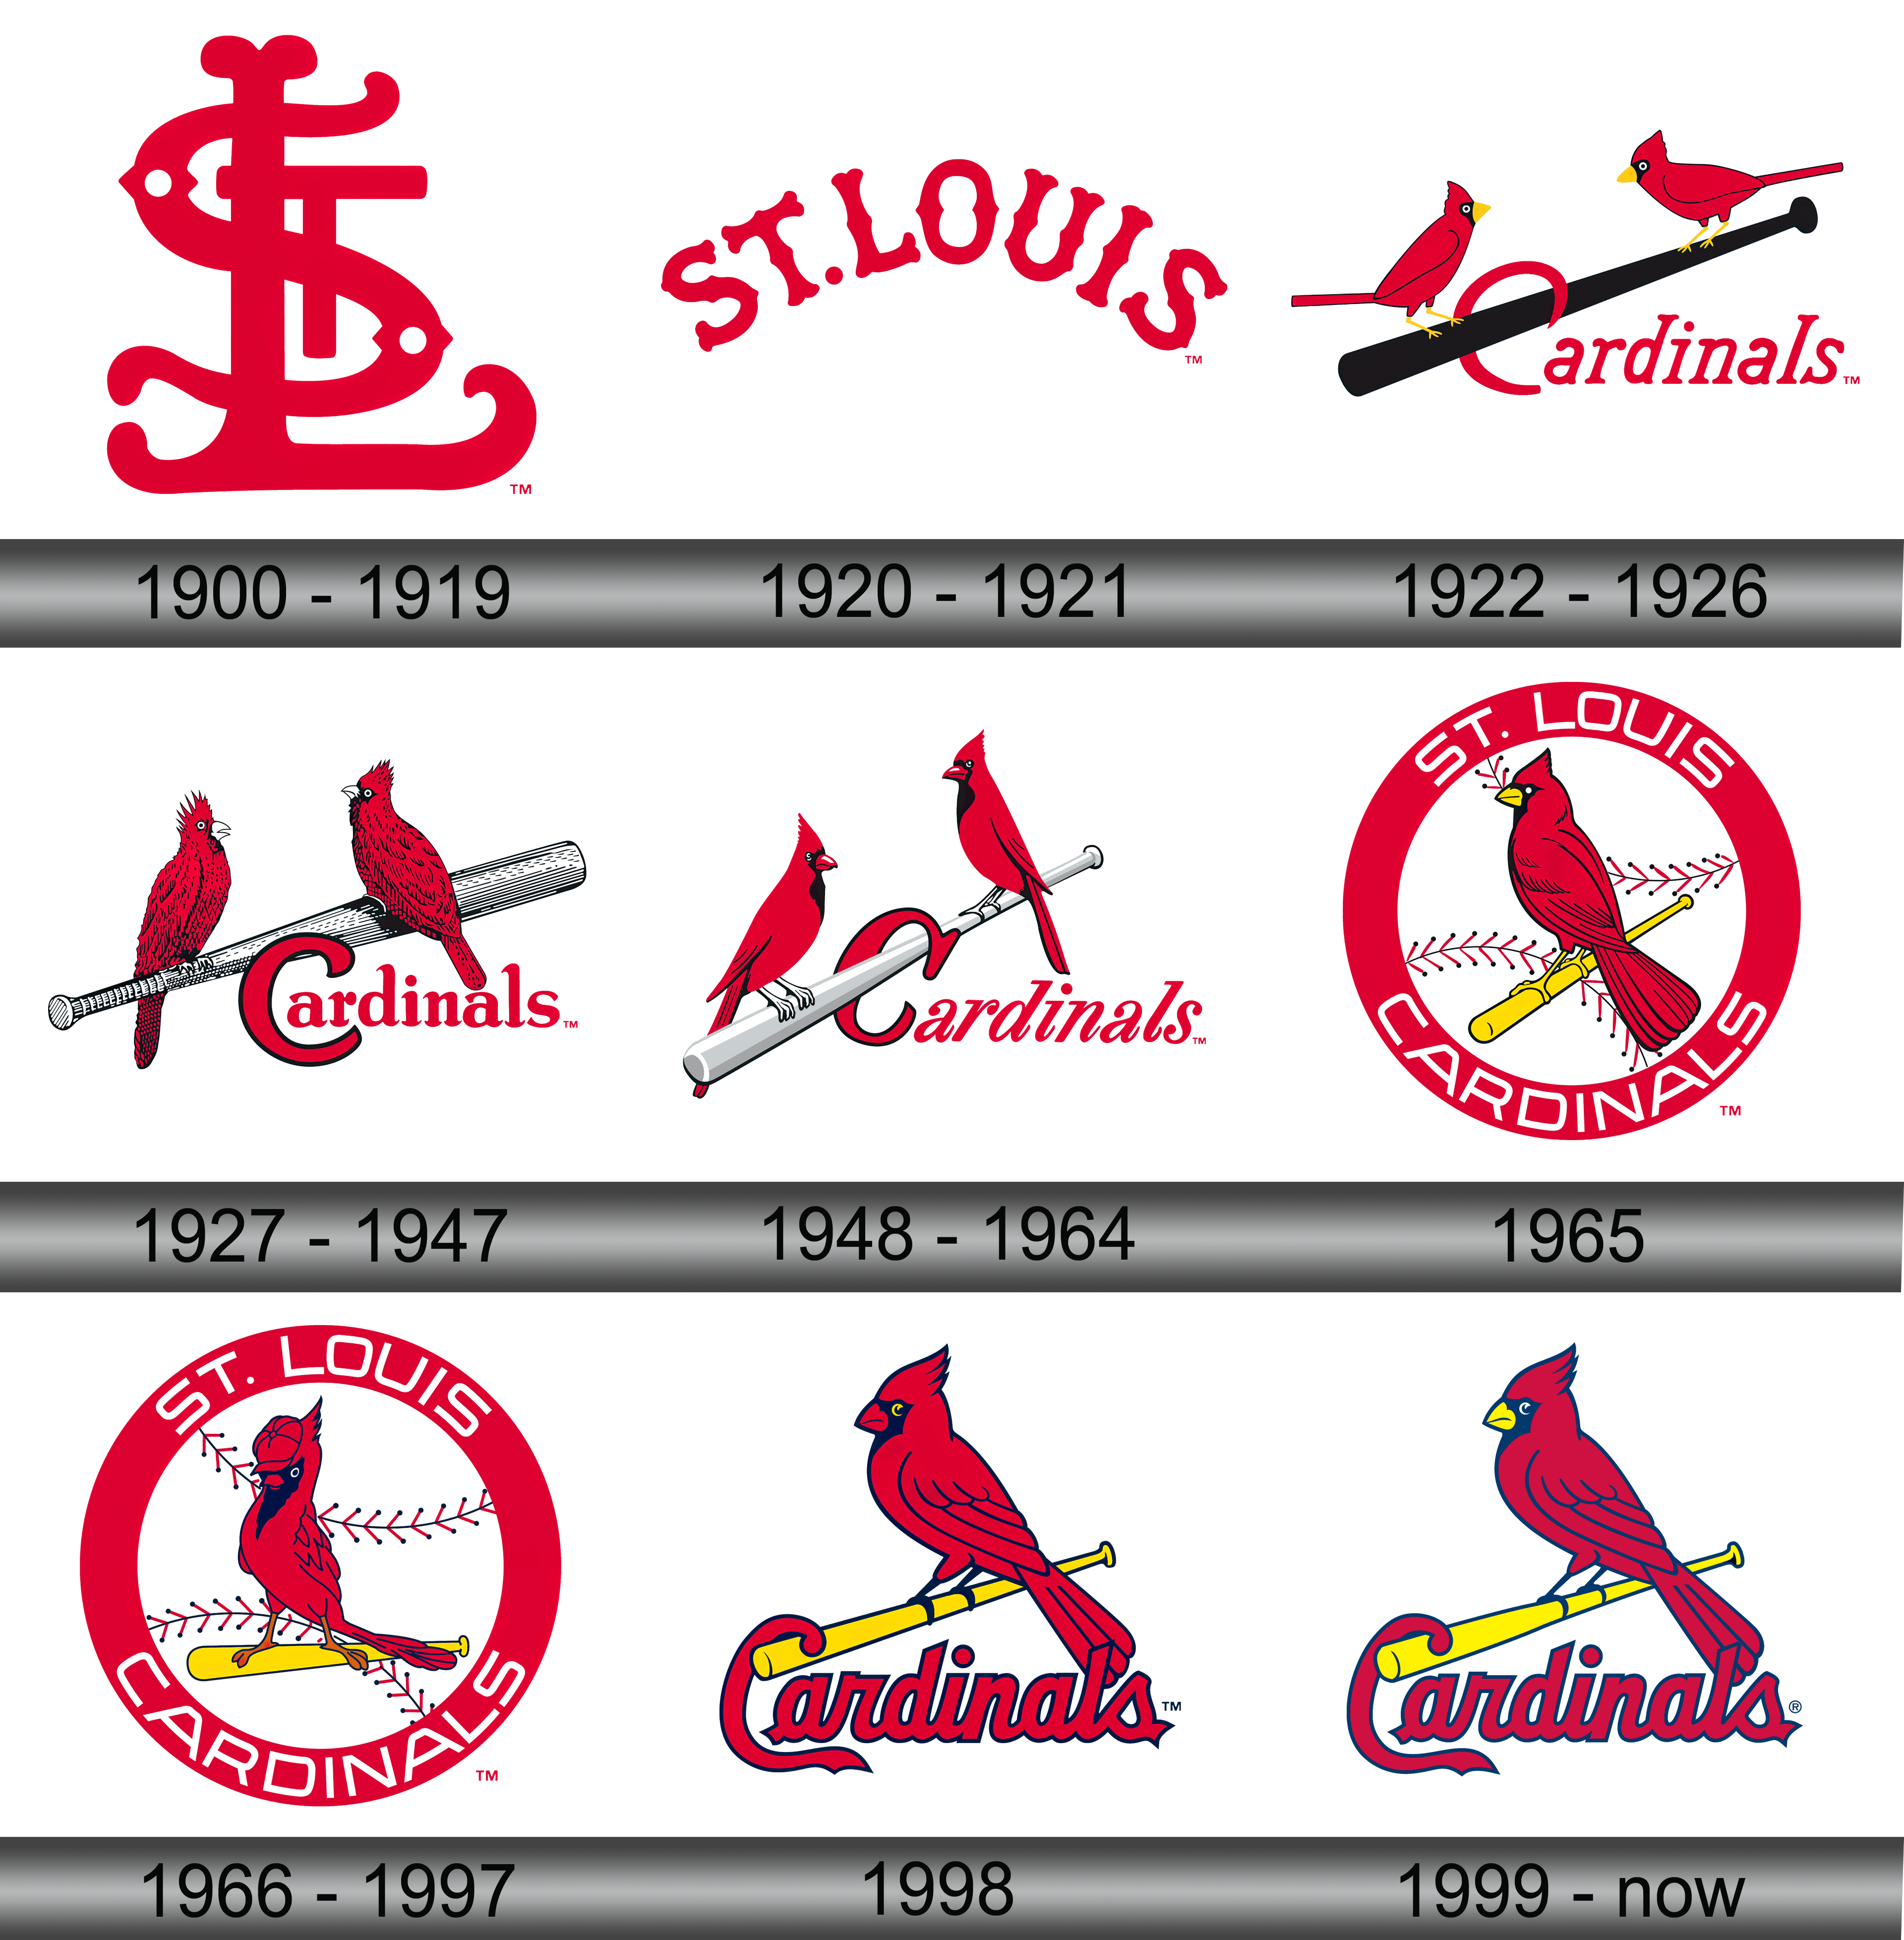 Meaning St. Louis Cardinals logo and symbol, history and evolution